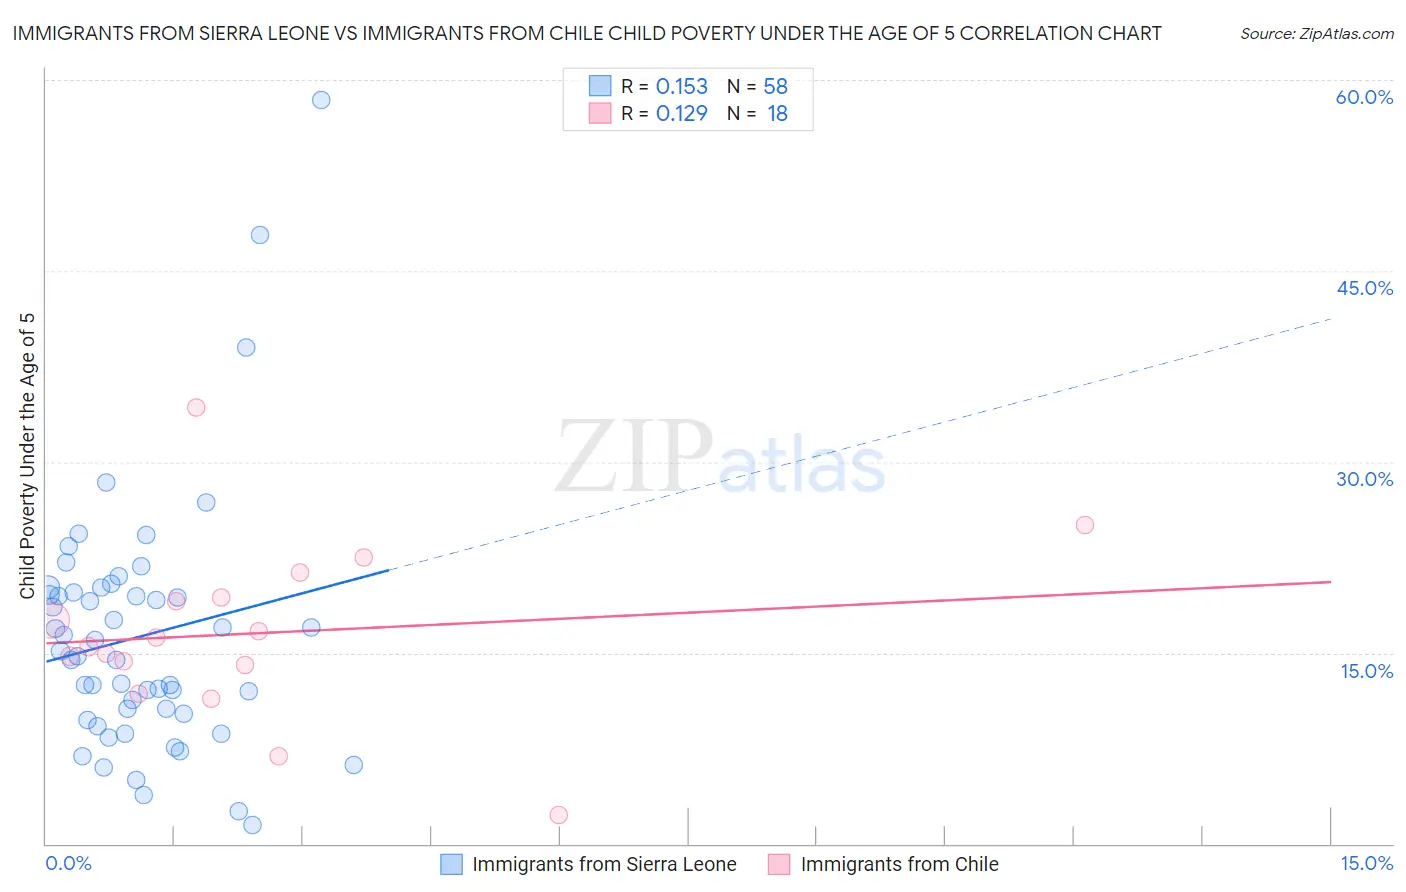 Immigrants from Sierra Leone vs Immigrants from Chile Child Poverty Under the Age of 5